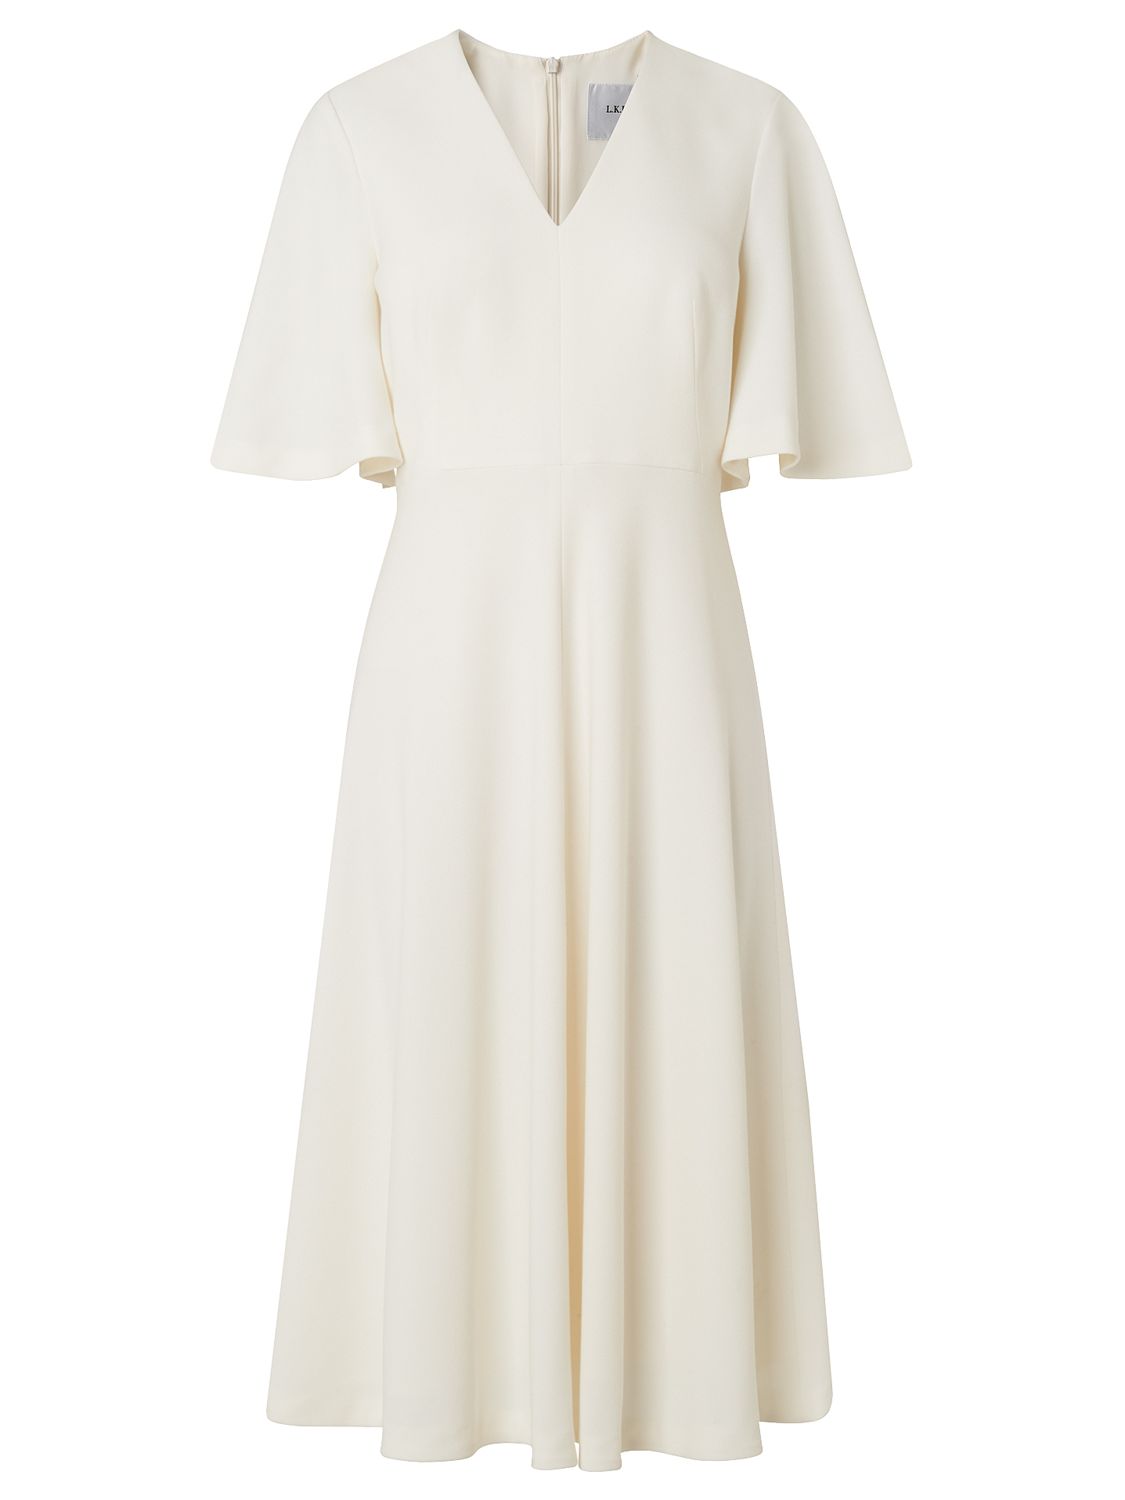 L.K. Bennett Rosie Fit And Flare Dress, Cream at John Lewis & Partners